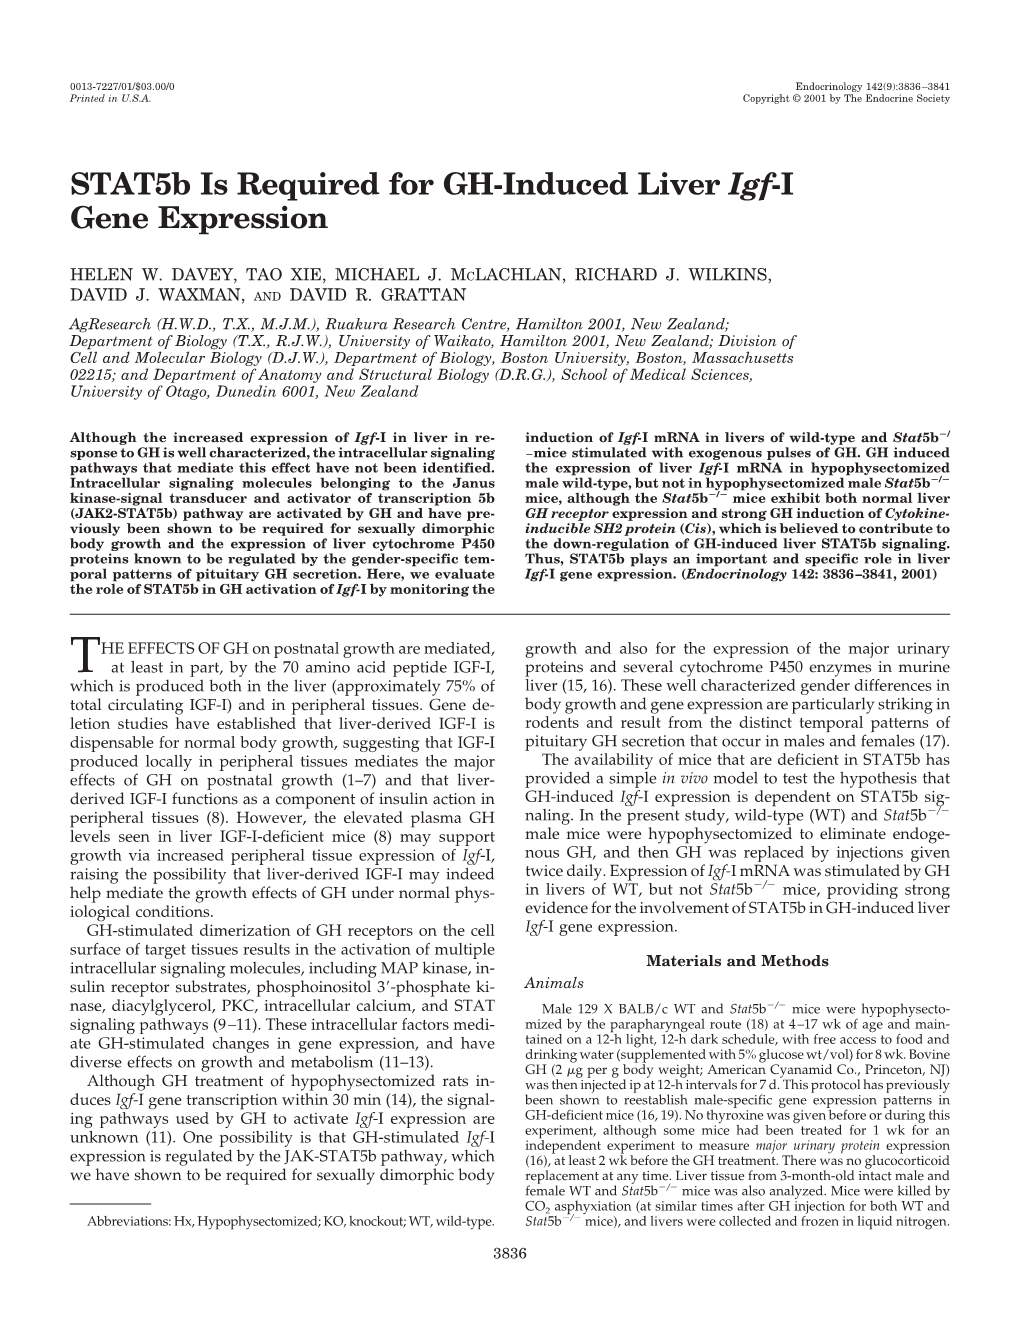 Stat5b Is Required for GH-Induced Liver Igf-I Gene Expression